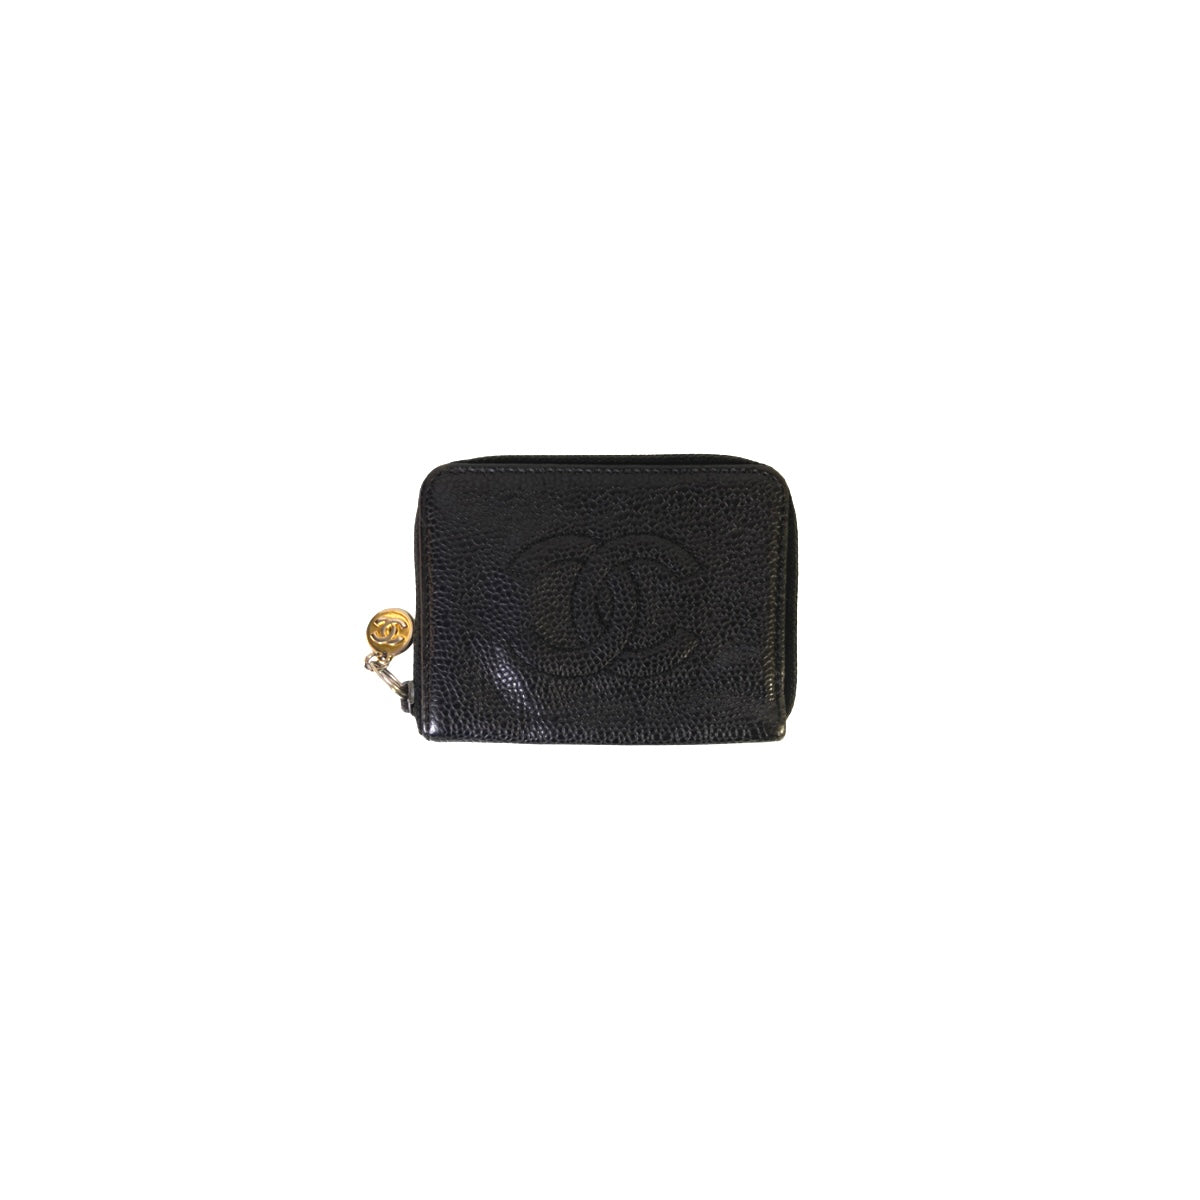 Timeless/classique leather wallet Chanel Black in Leather - 36904970